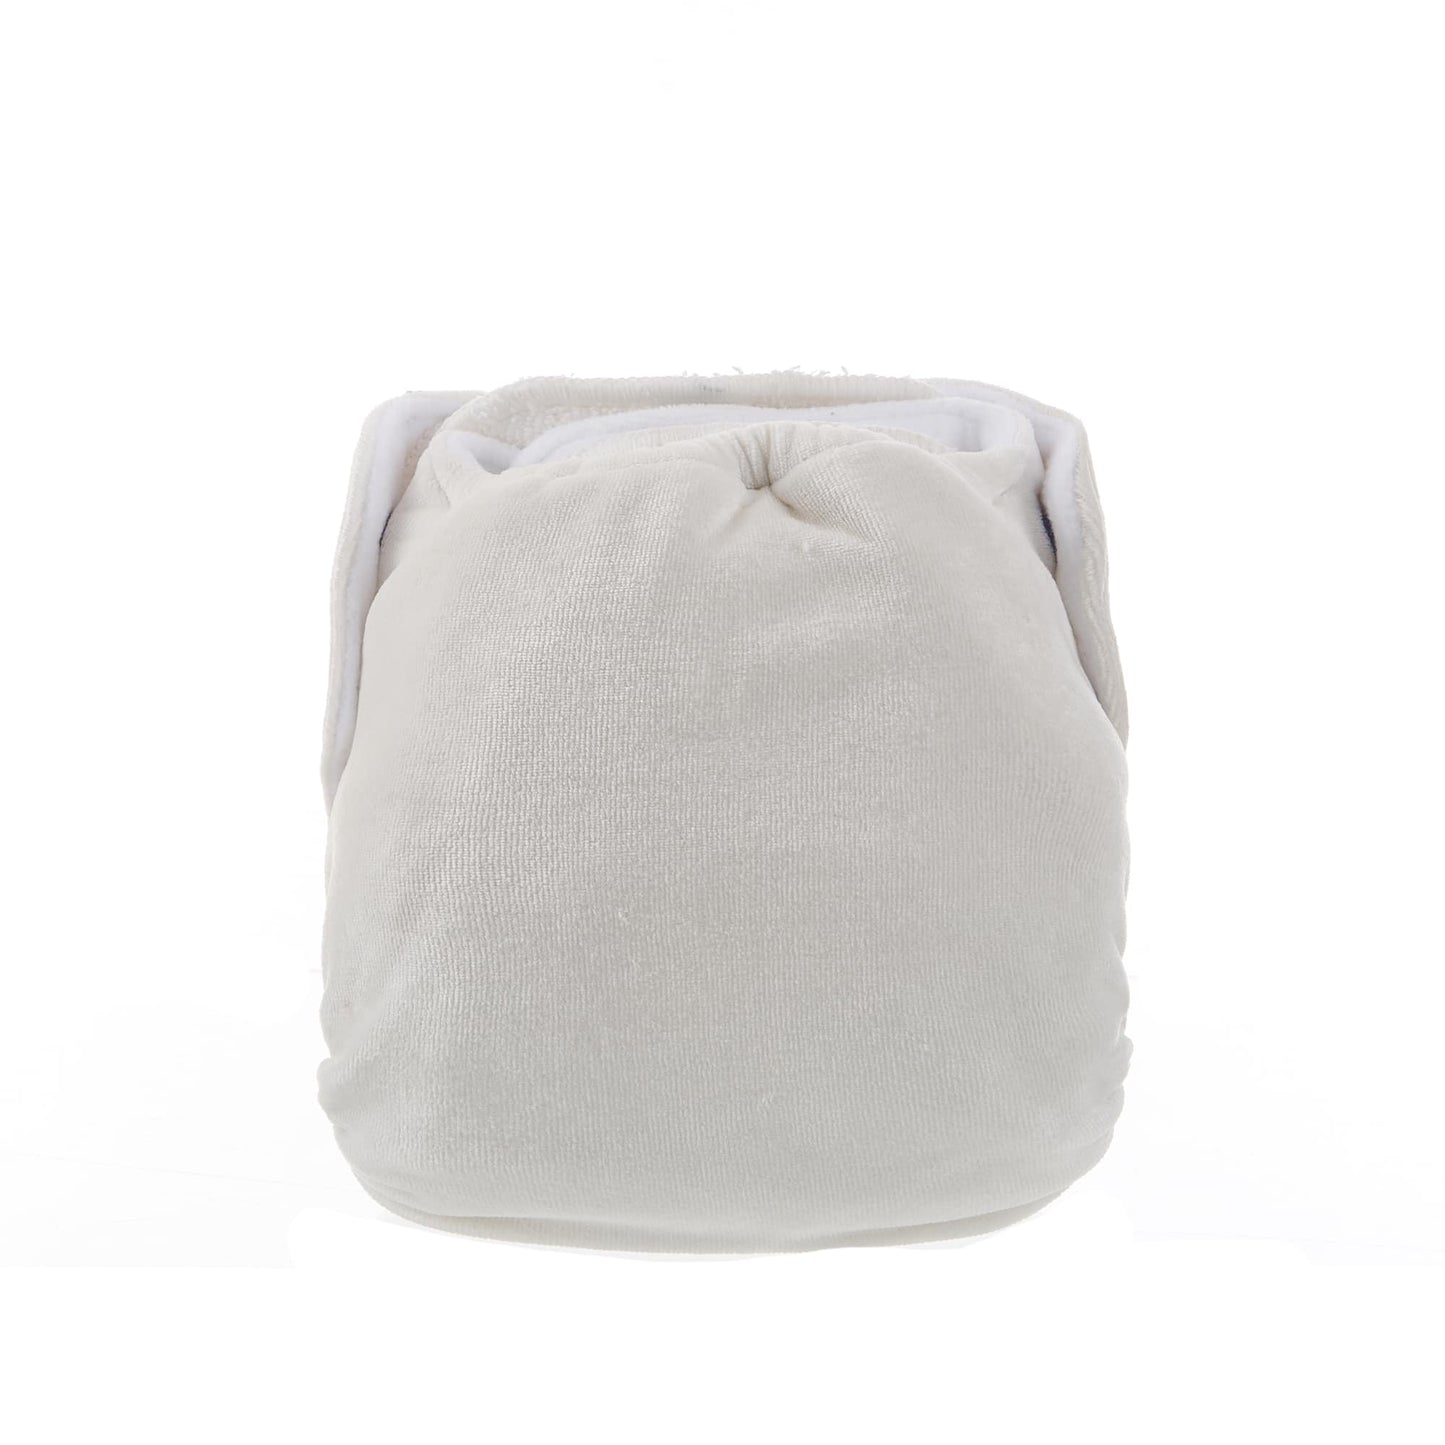 Reusabelles Onesize Fitted Nappy